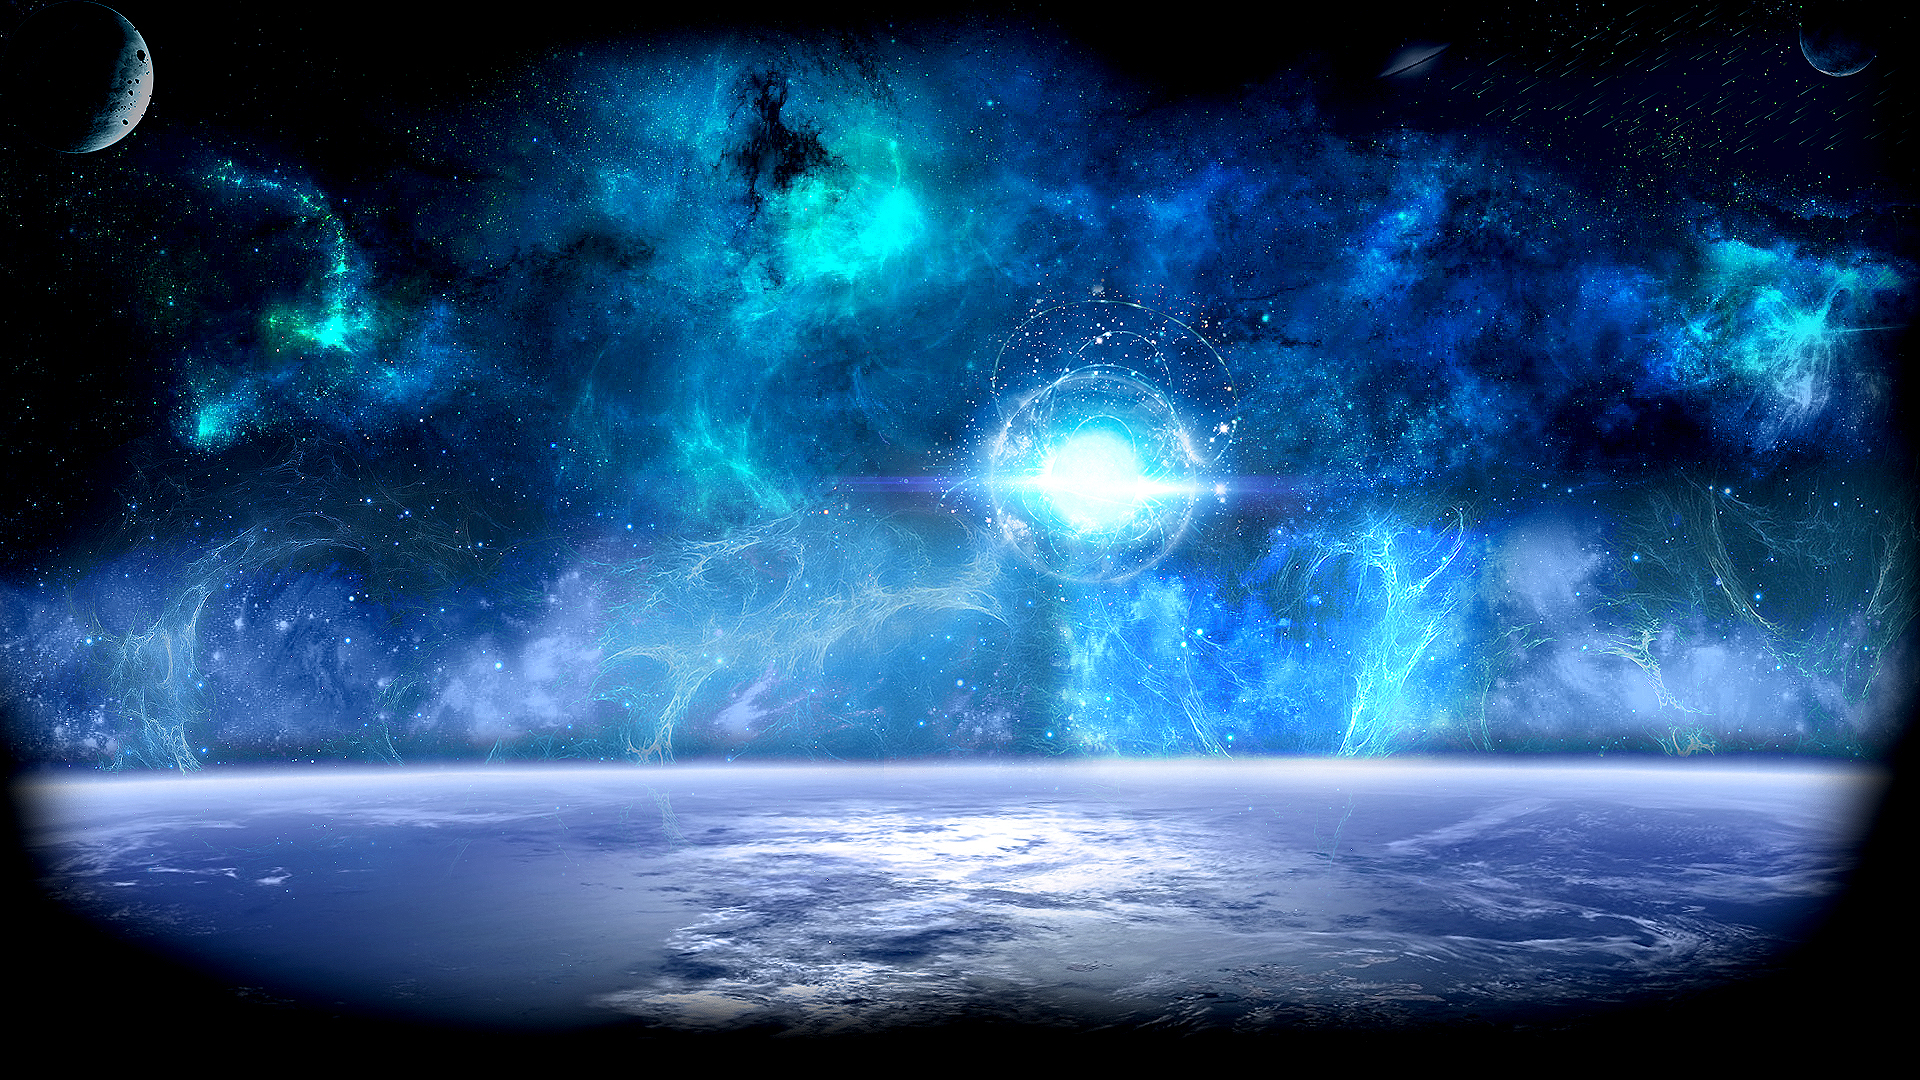 Epic Space Wallpaper Image Amp Pictures Becuo